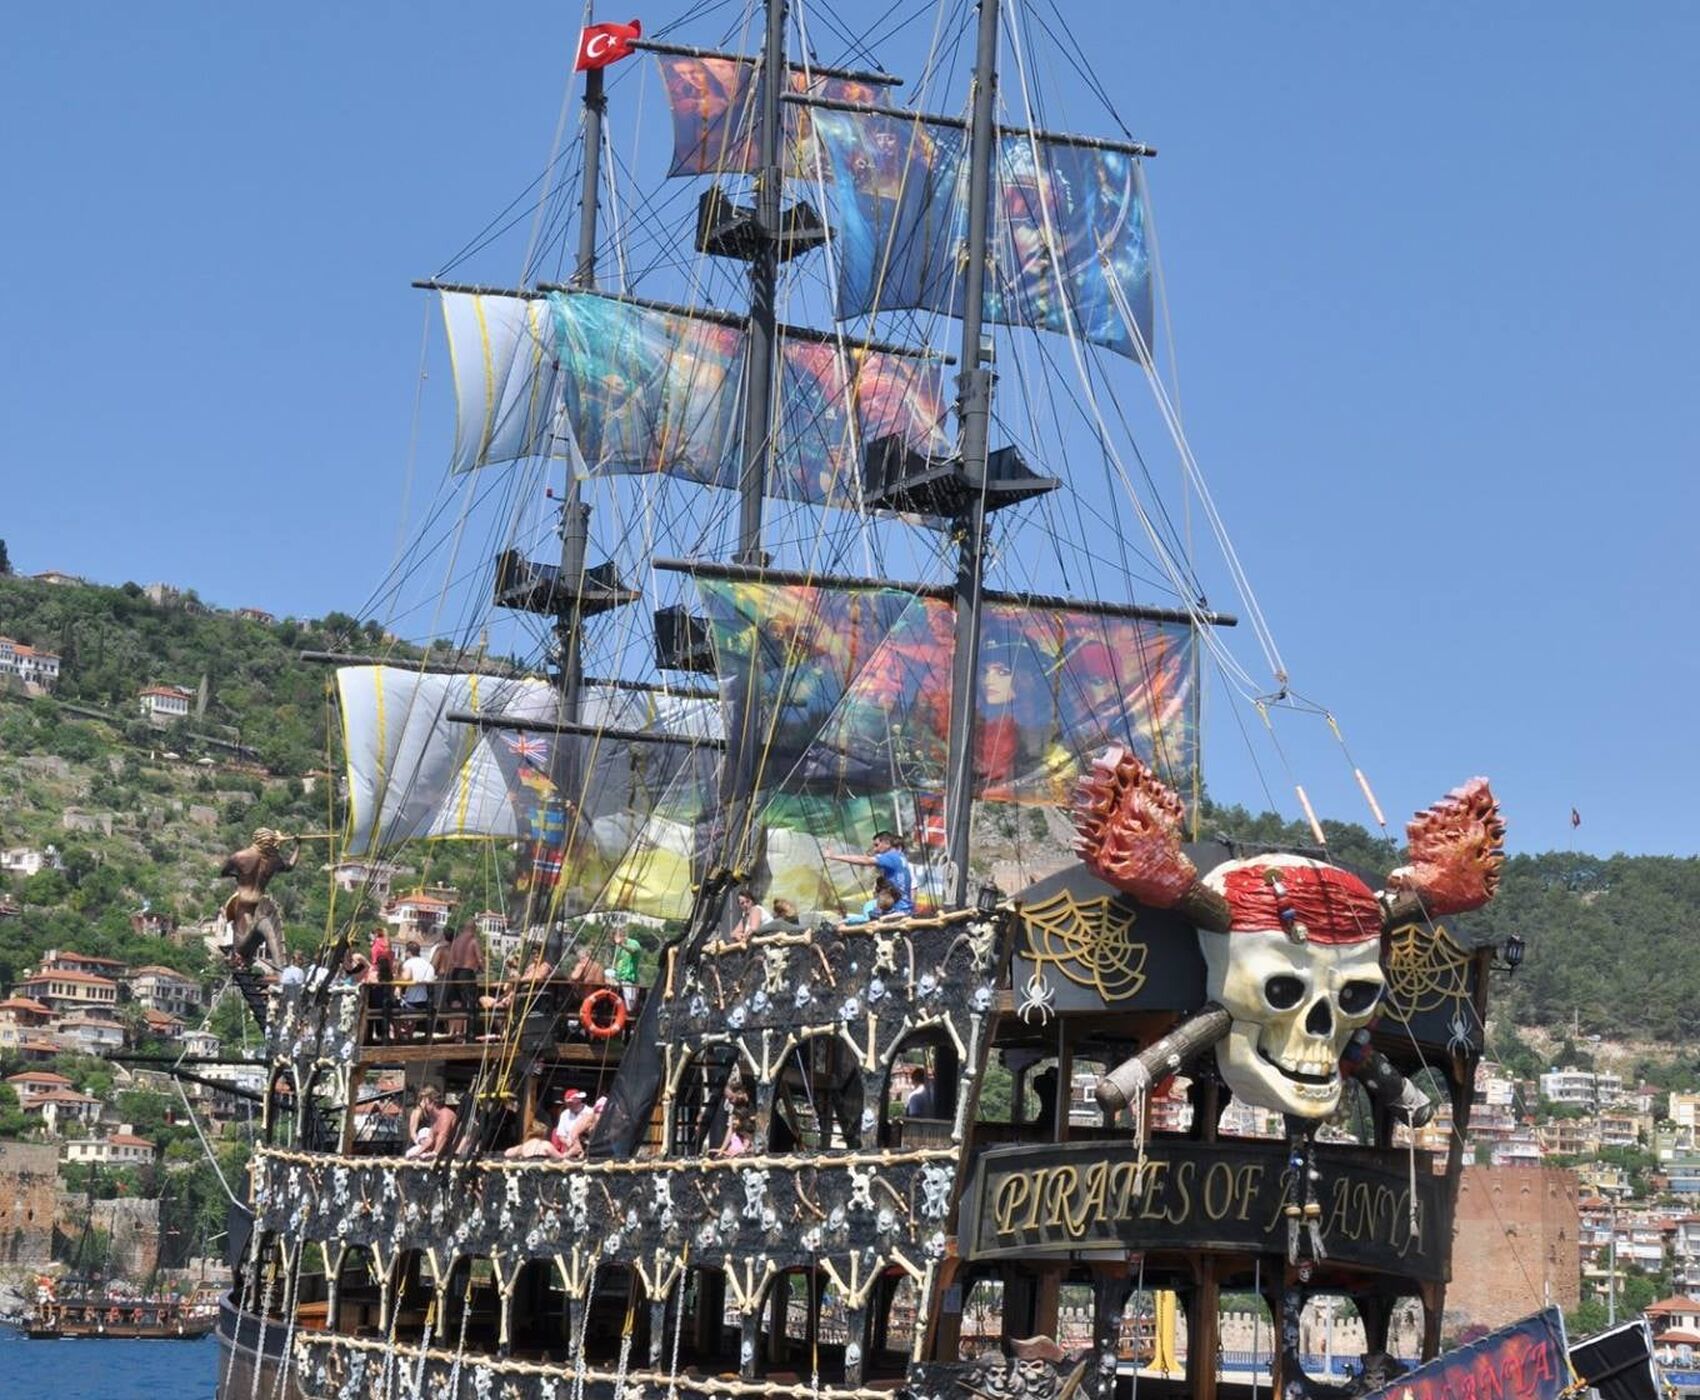 PIRATE YACHT FROM ALANYA